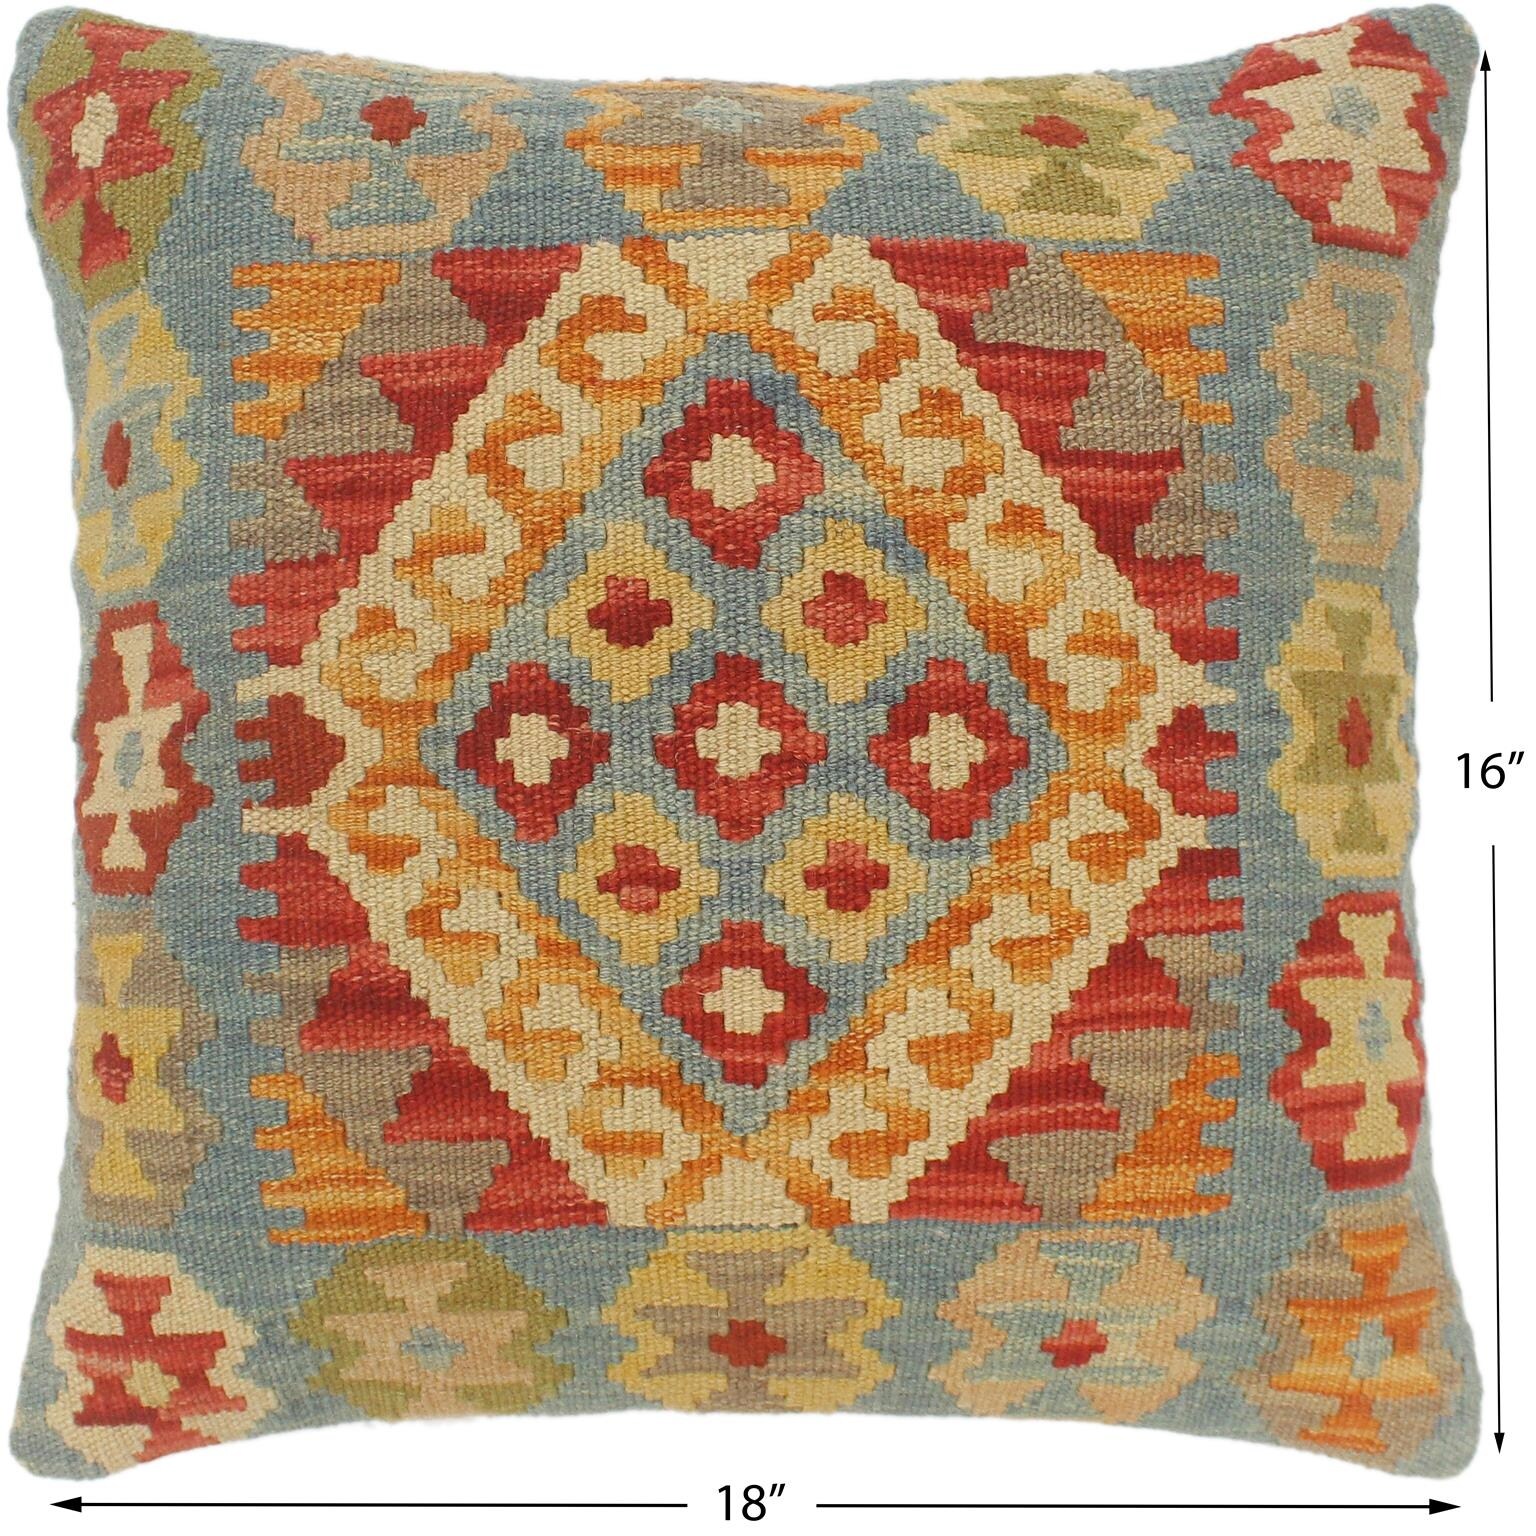 https://ak1.ostkcdn.com/images/products/is/images/direct/a2512e0caee0222134923f355576f49804edc30d/Southwestern-Turkish-Pollock-Hand-Woven-Kilim-Pillow.jpg